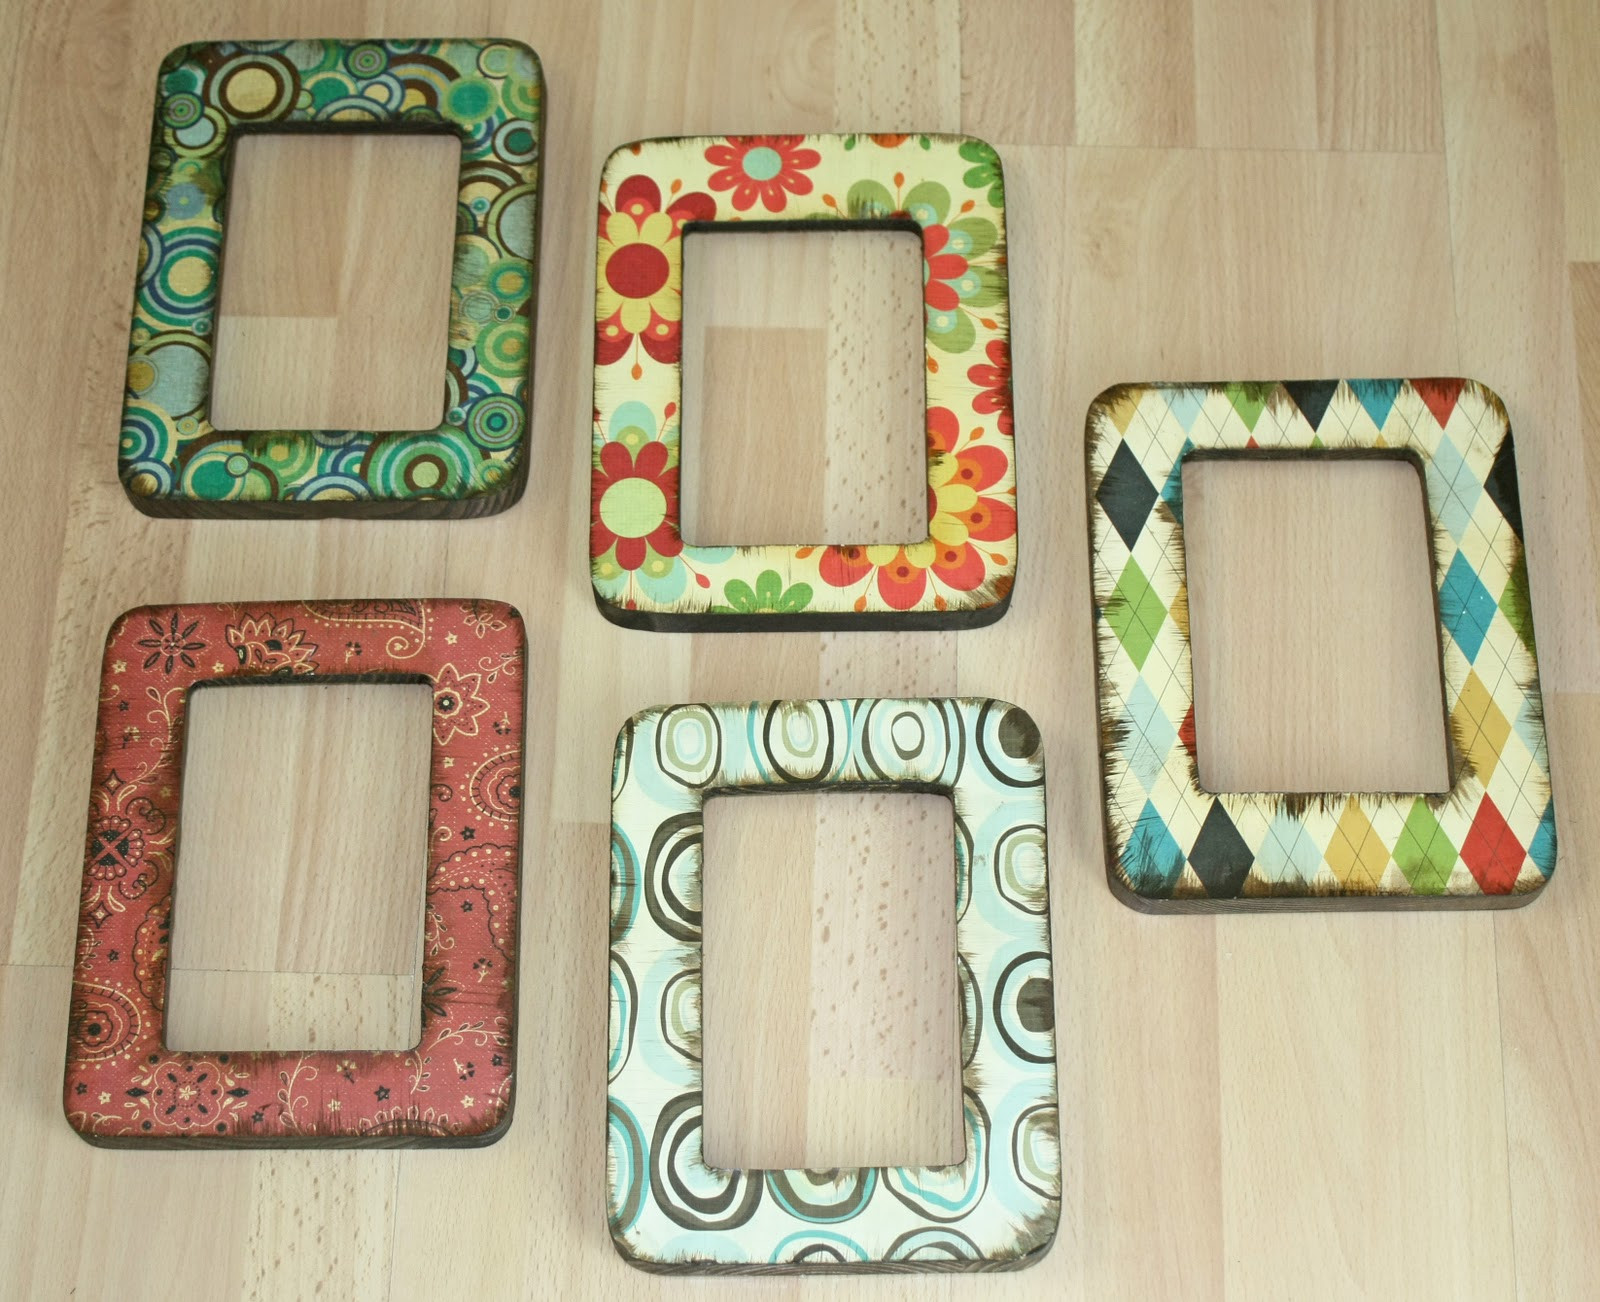 Picture Frame Decorating Craft Ideas
 40 Ways To Decorate Your Home With Paper Crafts